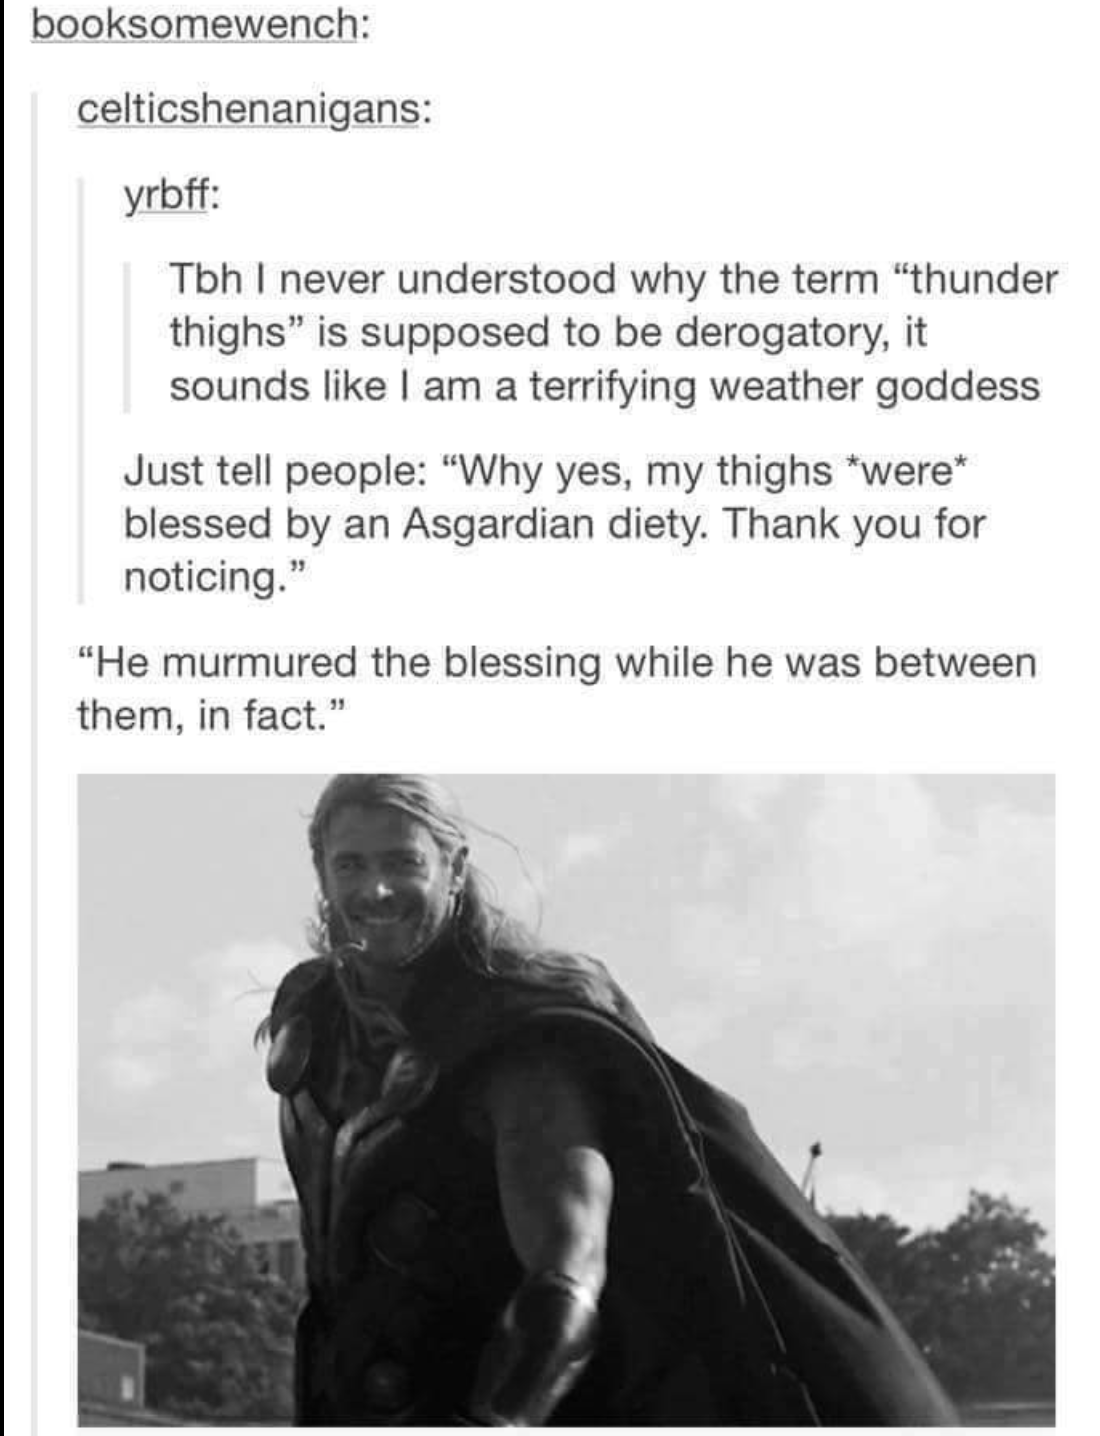 thor thunder thighs - booksomewench celticshenanigans yrbff Tbh I never understood why the term "thunder thighs" is supposed to be derogatory, it sounds I am a terrifying weather goddess Just tell people "Why yes, my thighs were blessed by an Asgardian di